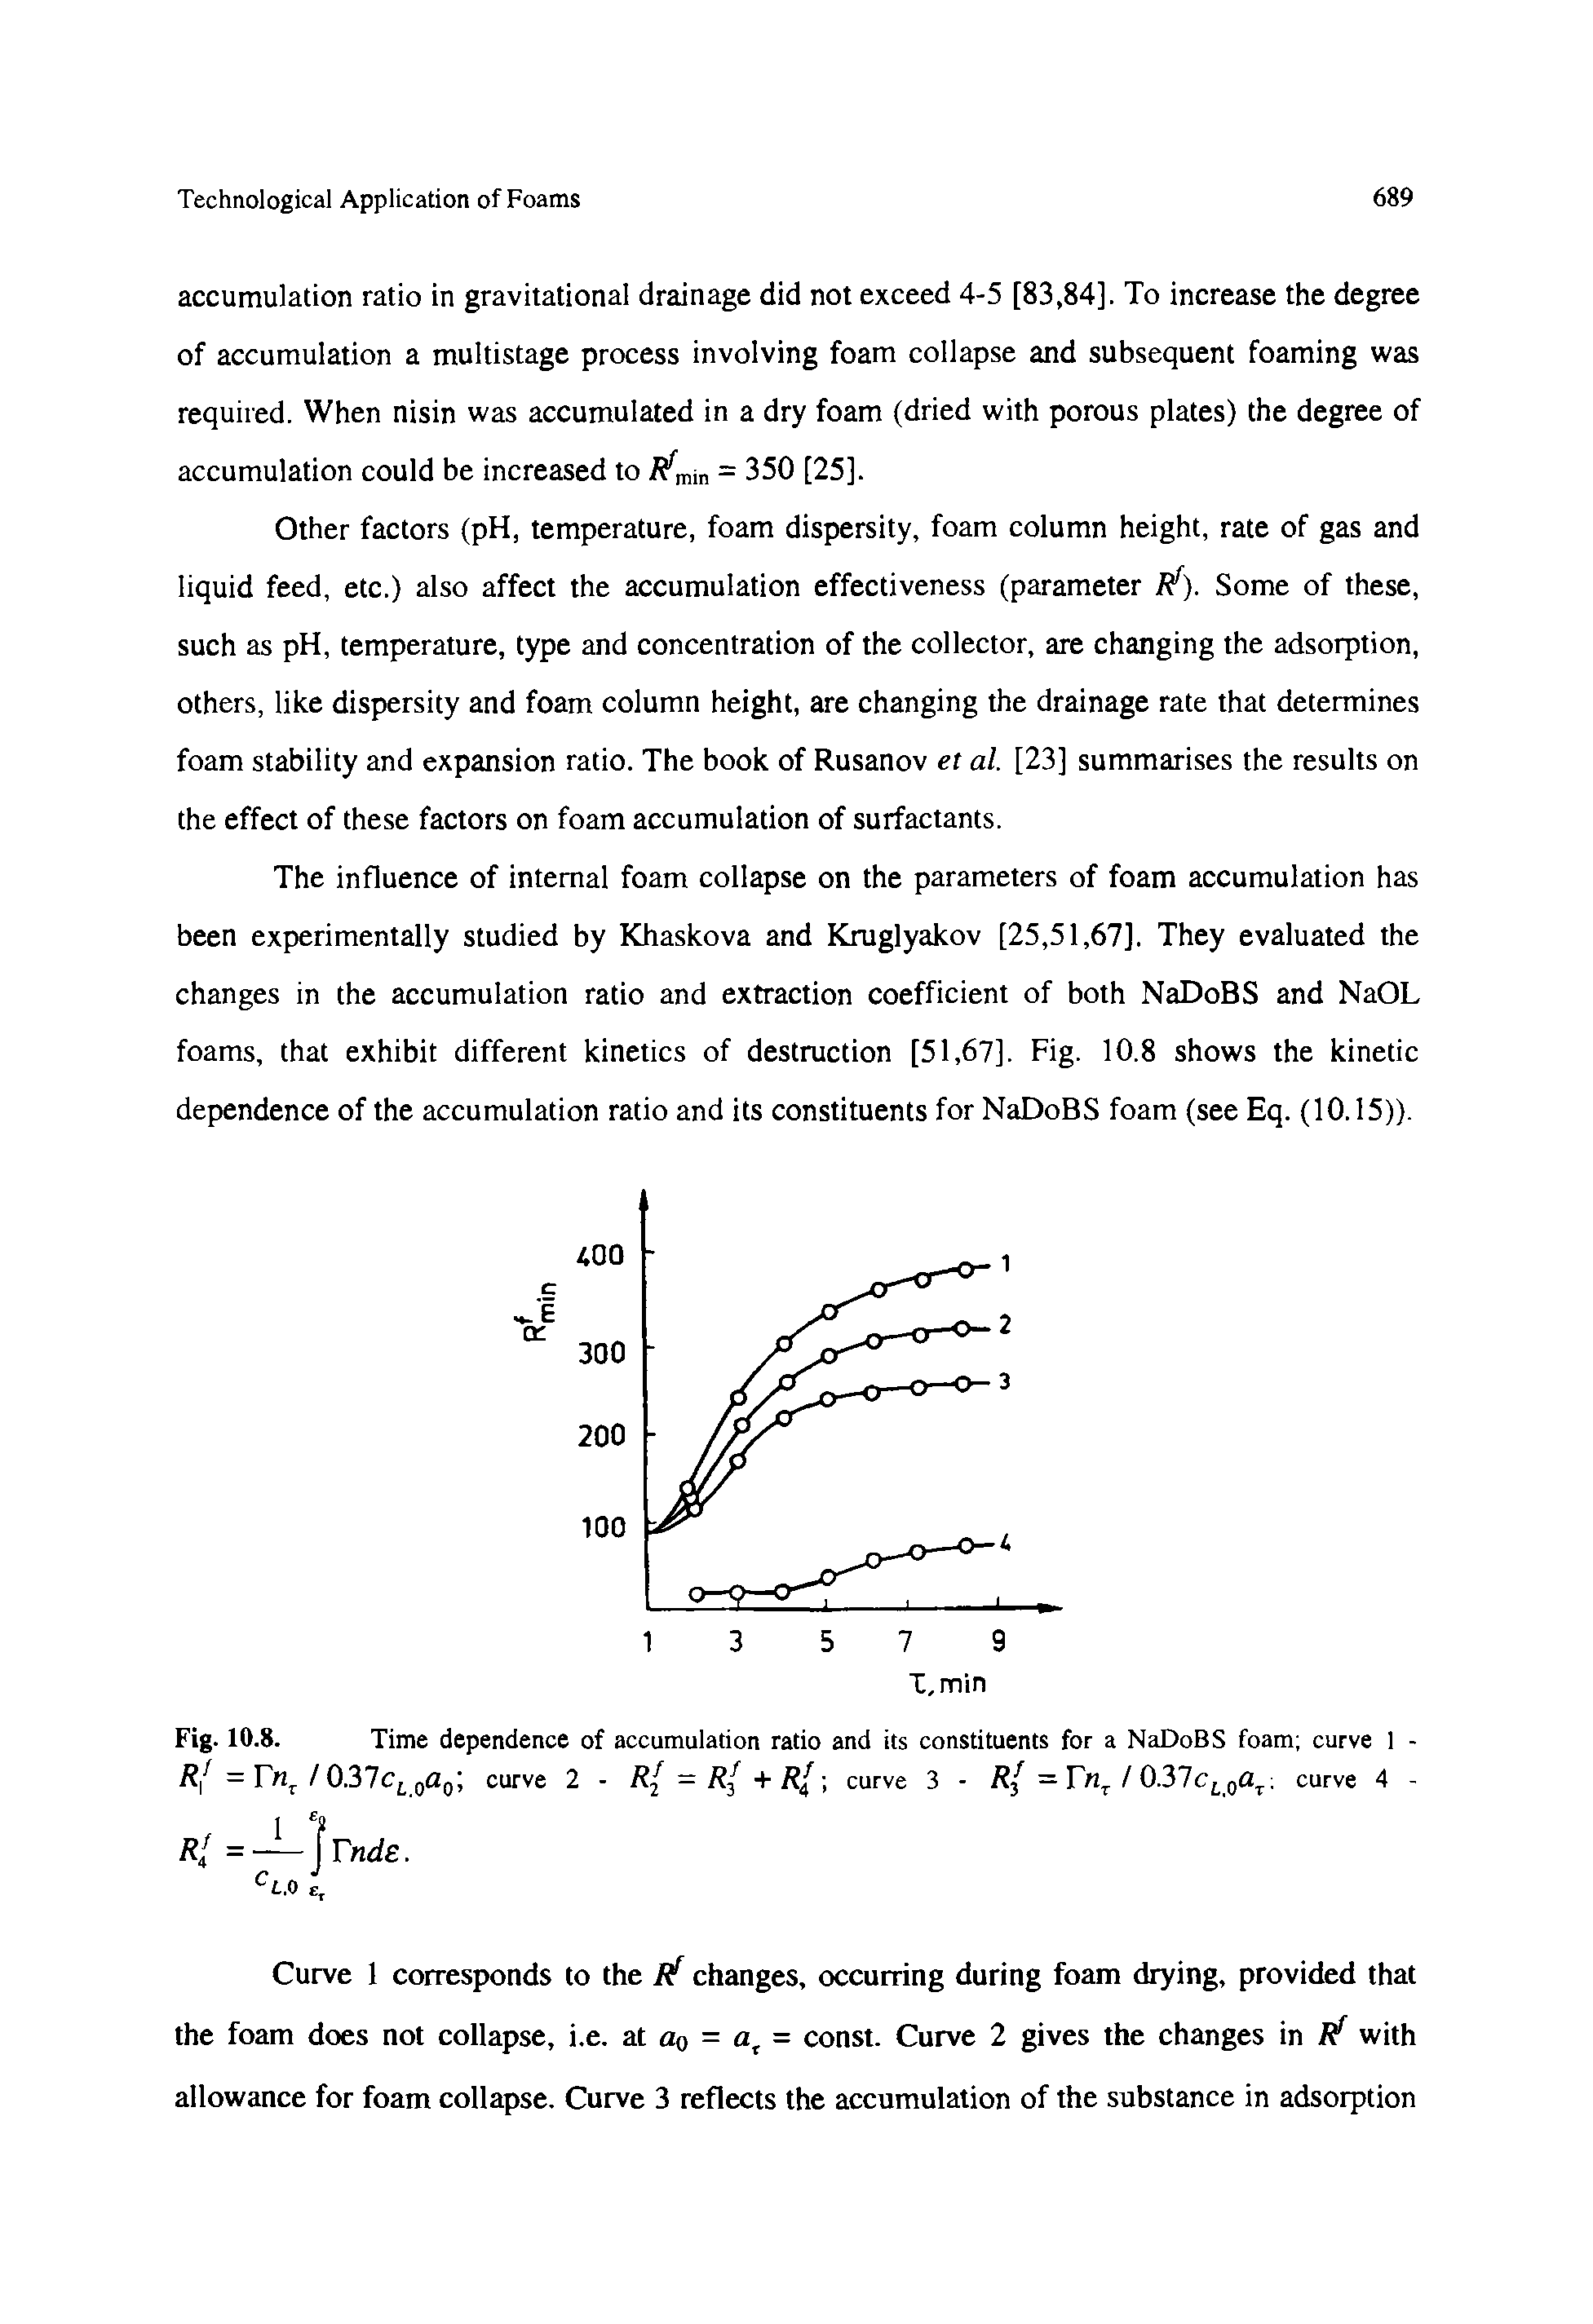 Fig. 10.8. Time dependence of accumulation ratio and its constituents for a NaDoBS foam curve 1 -...